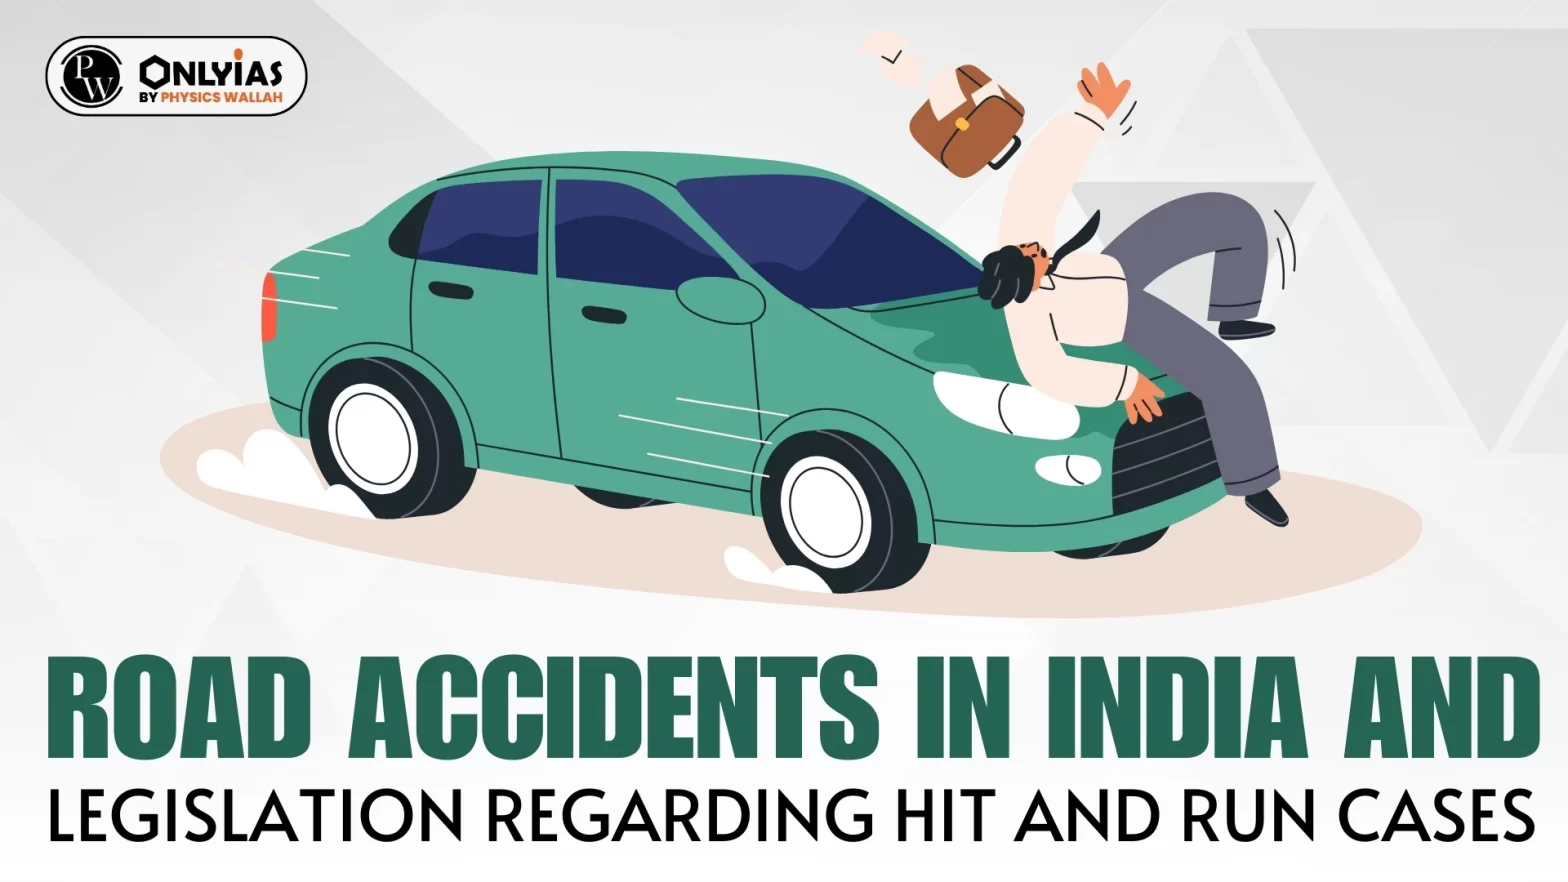 Road Accidents in India and Legislation Regarding Hit and Run Cases